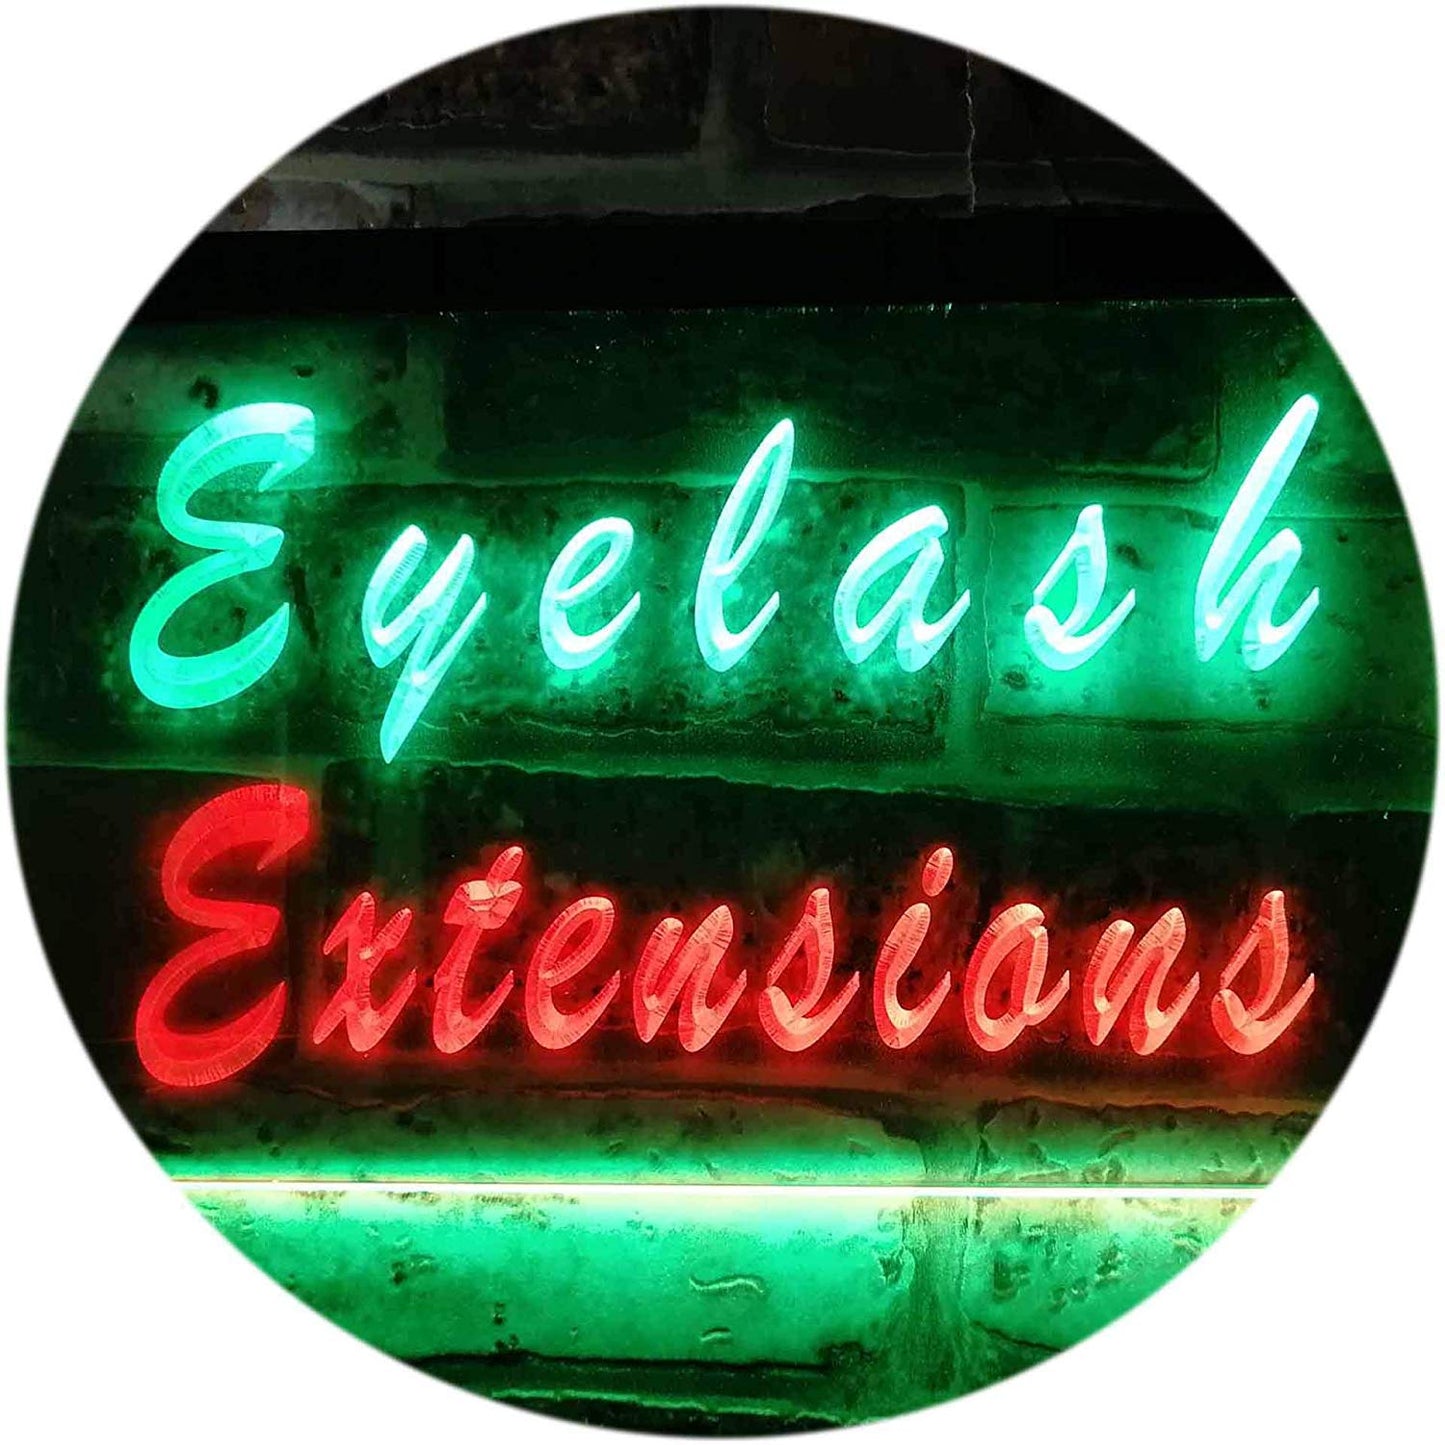 Beauty Salon Eyelash Extensions LED Neon Light Sign - Way Up Gifts